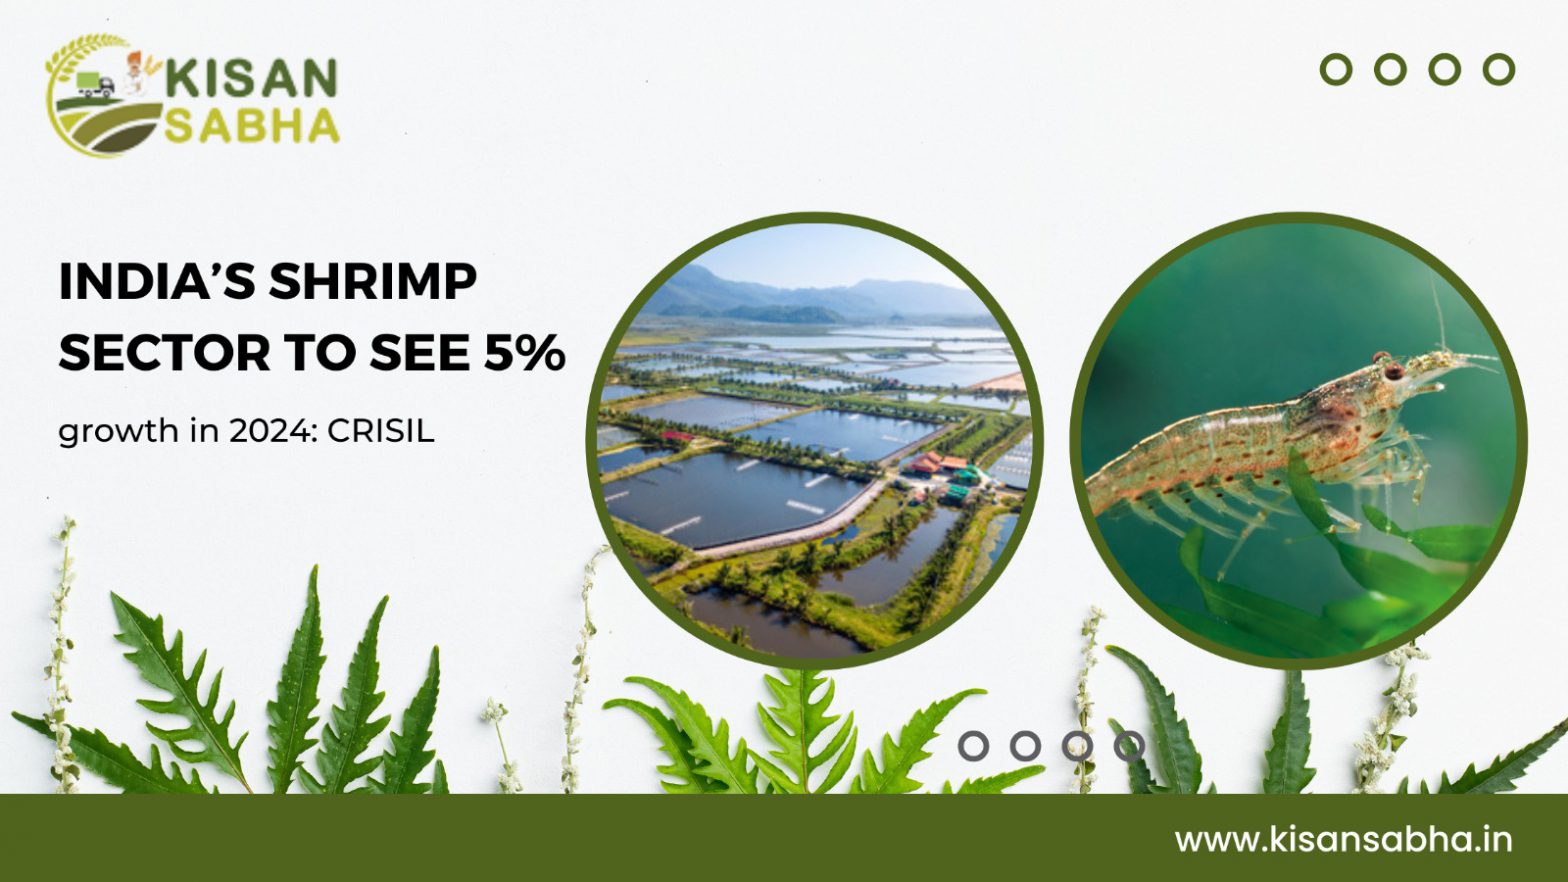 India’s shrimp sector to see 5% growth in 2024: CRISIL